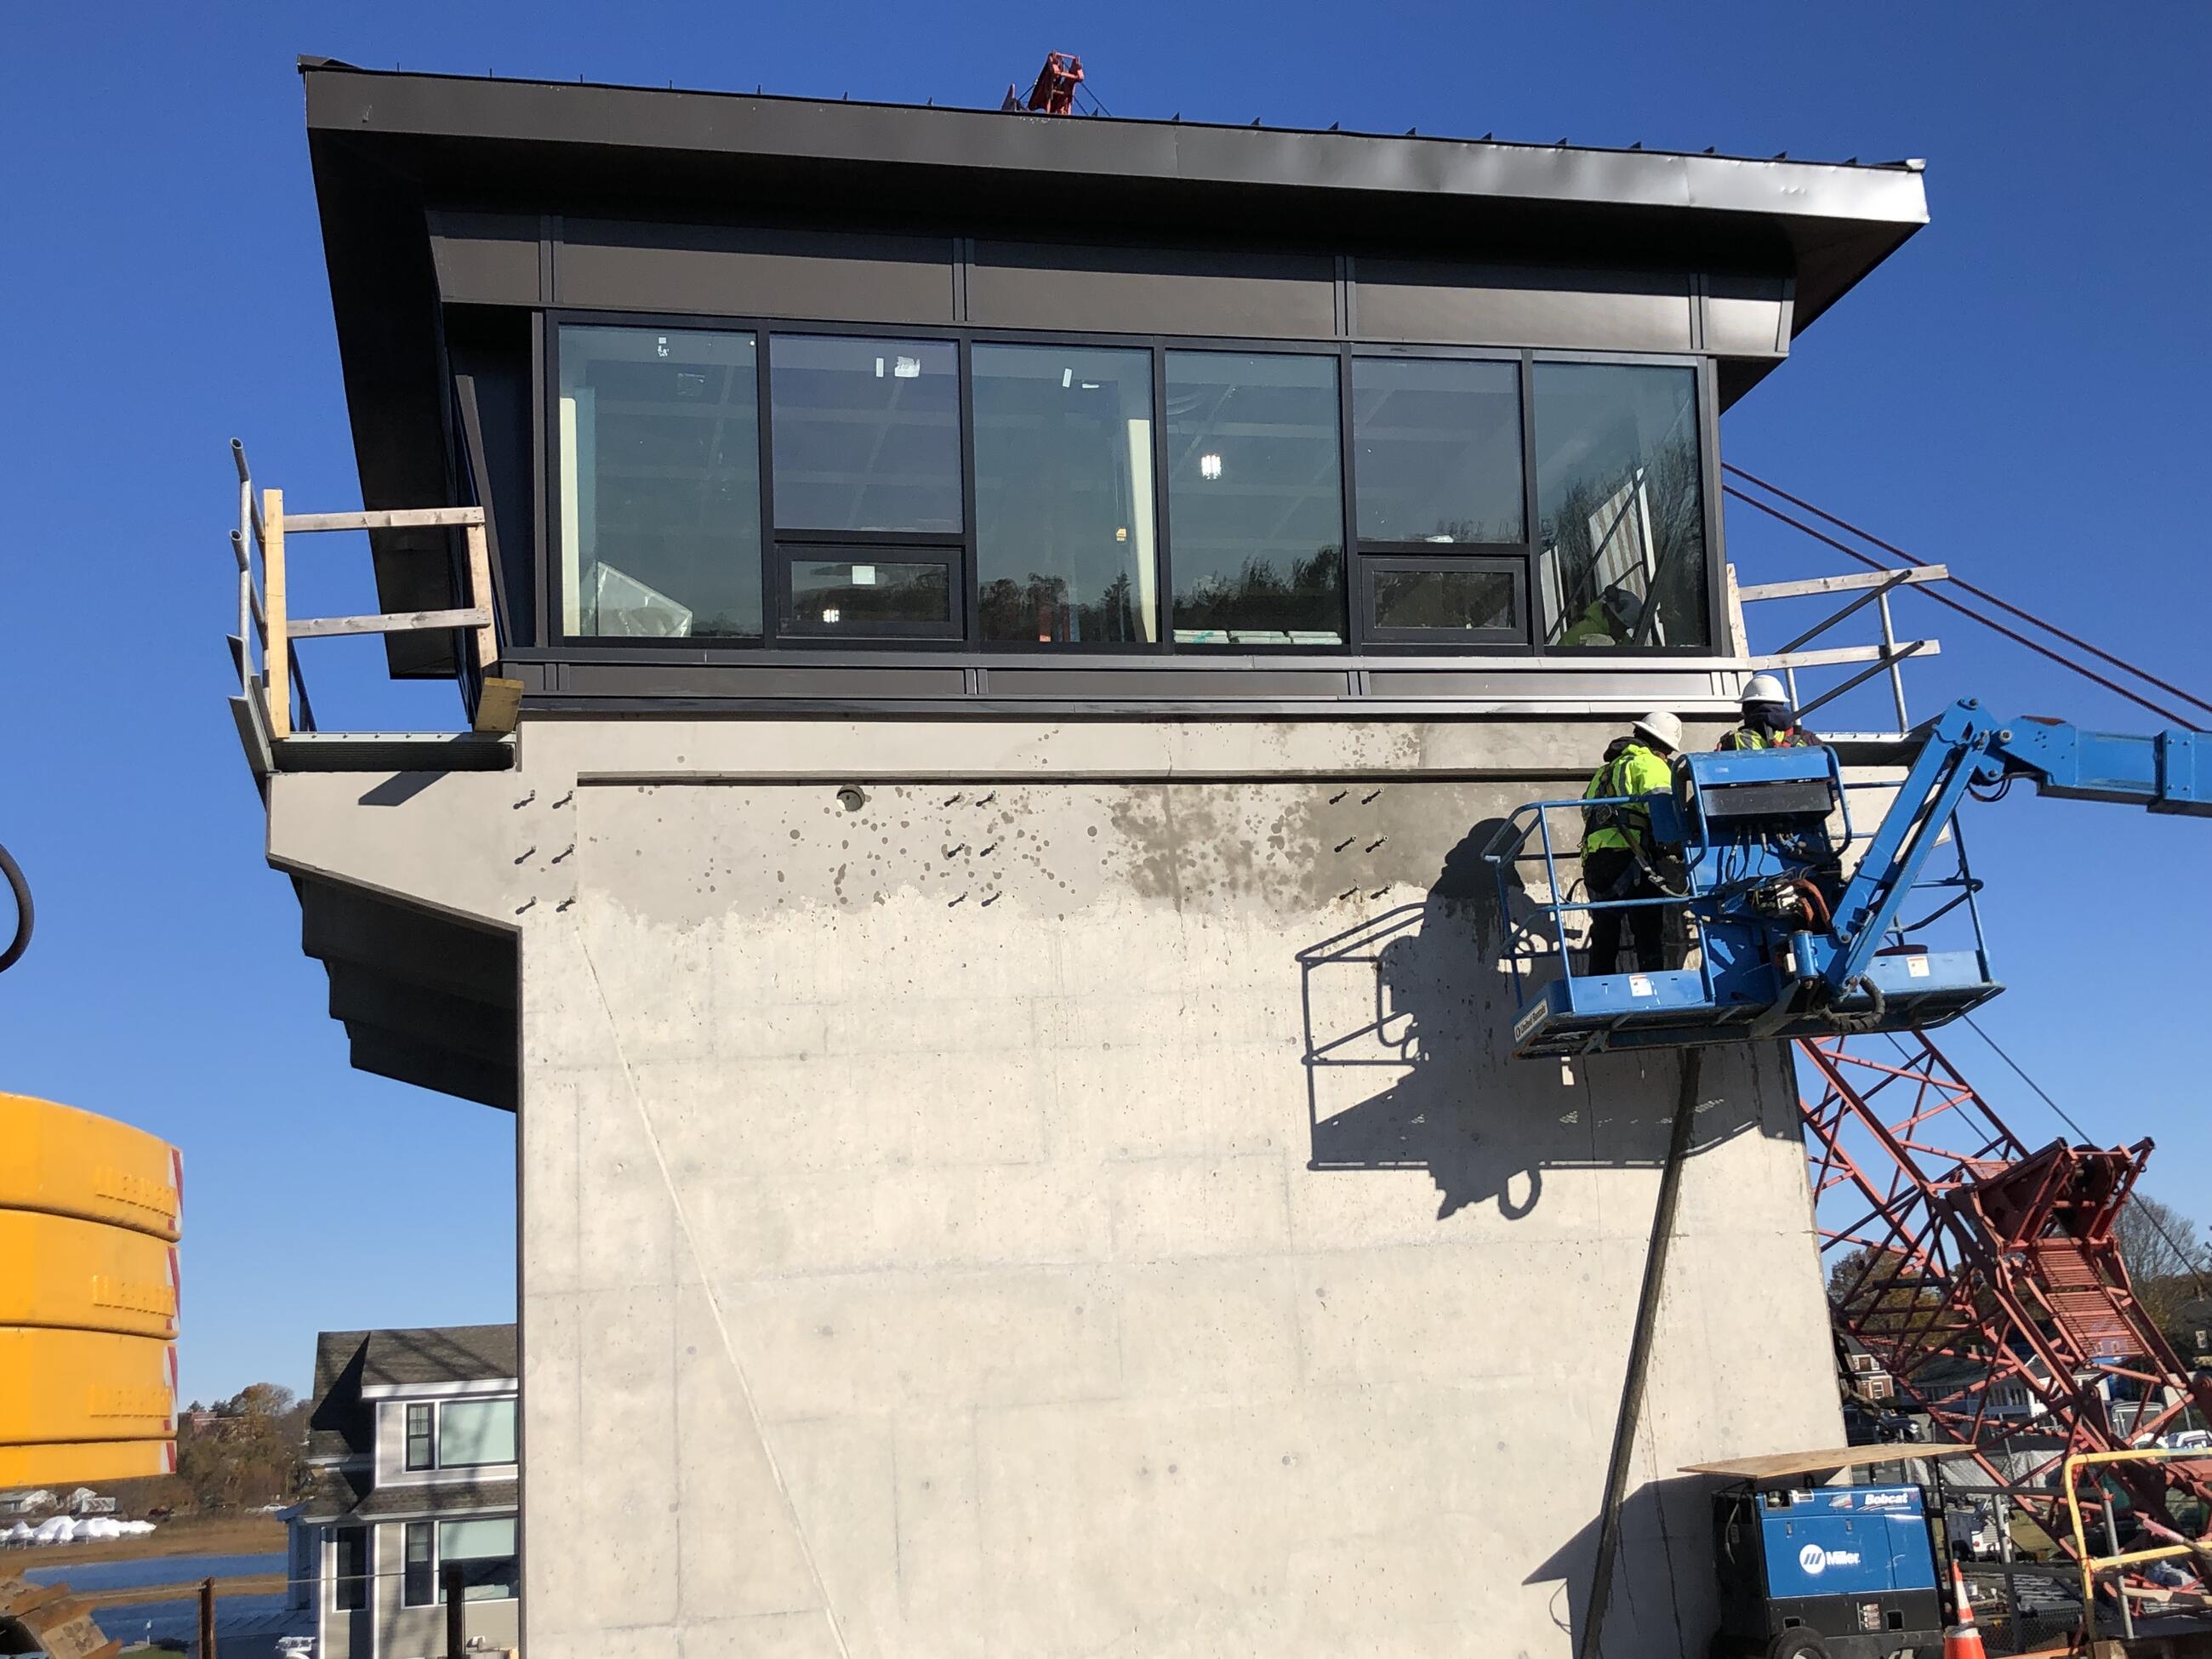 Two workers in a cherry picker work on the exterior of the control tower. Another worker can be seen through the recently installed windows working inside the control tower.